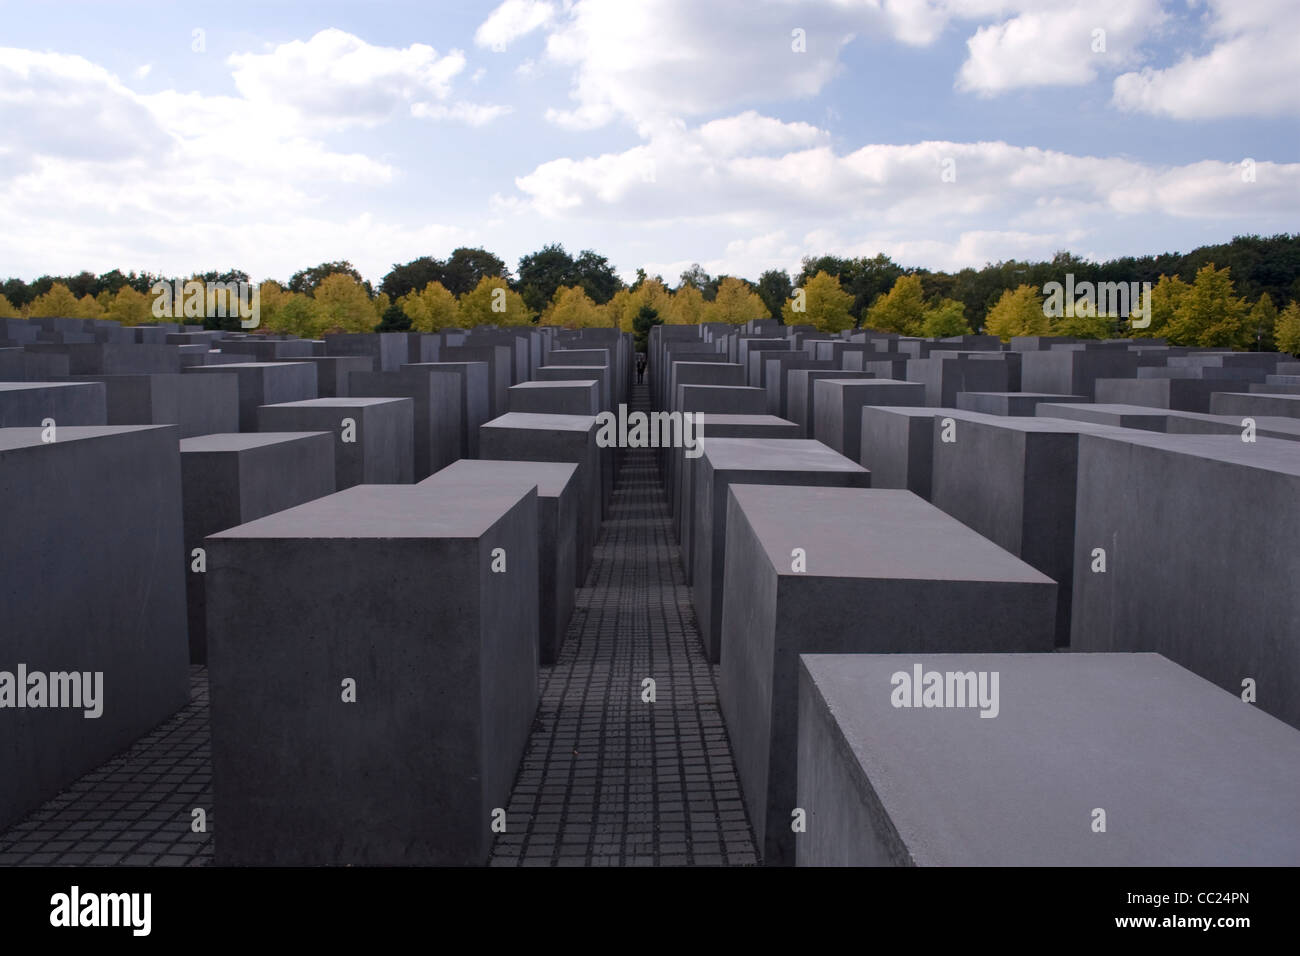 The Holocaust Memorial in Berlin, Germany. Stock Photo